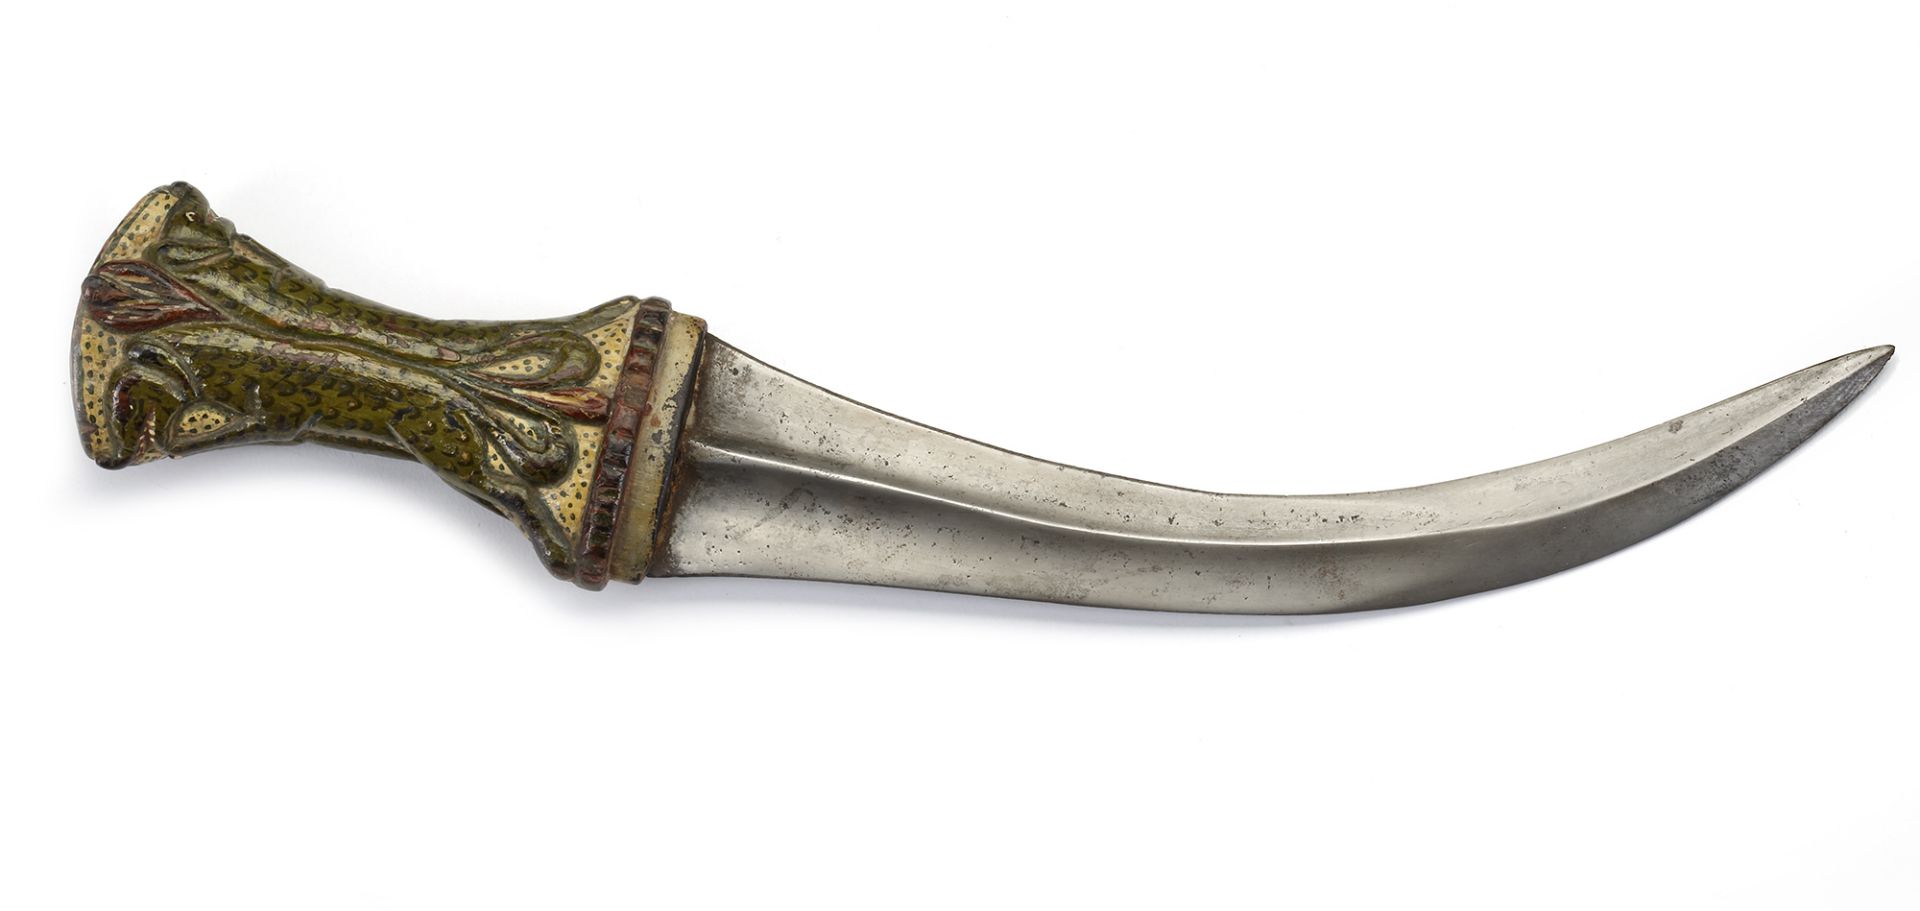 A MUGHAL DAGGER WITH WOODEN HILT, NORTH-INDIA, 19TH CENTURY - Image 4 of 4